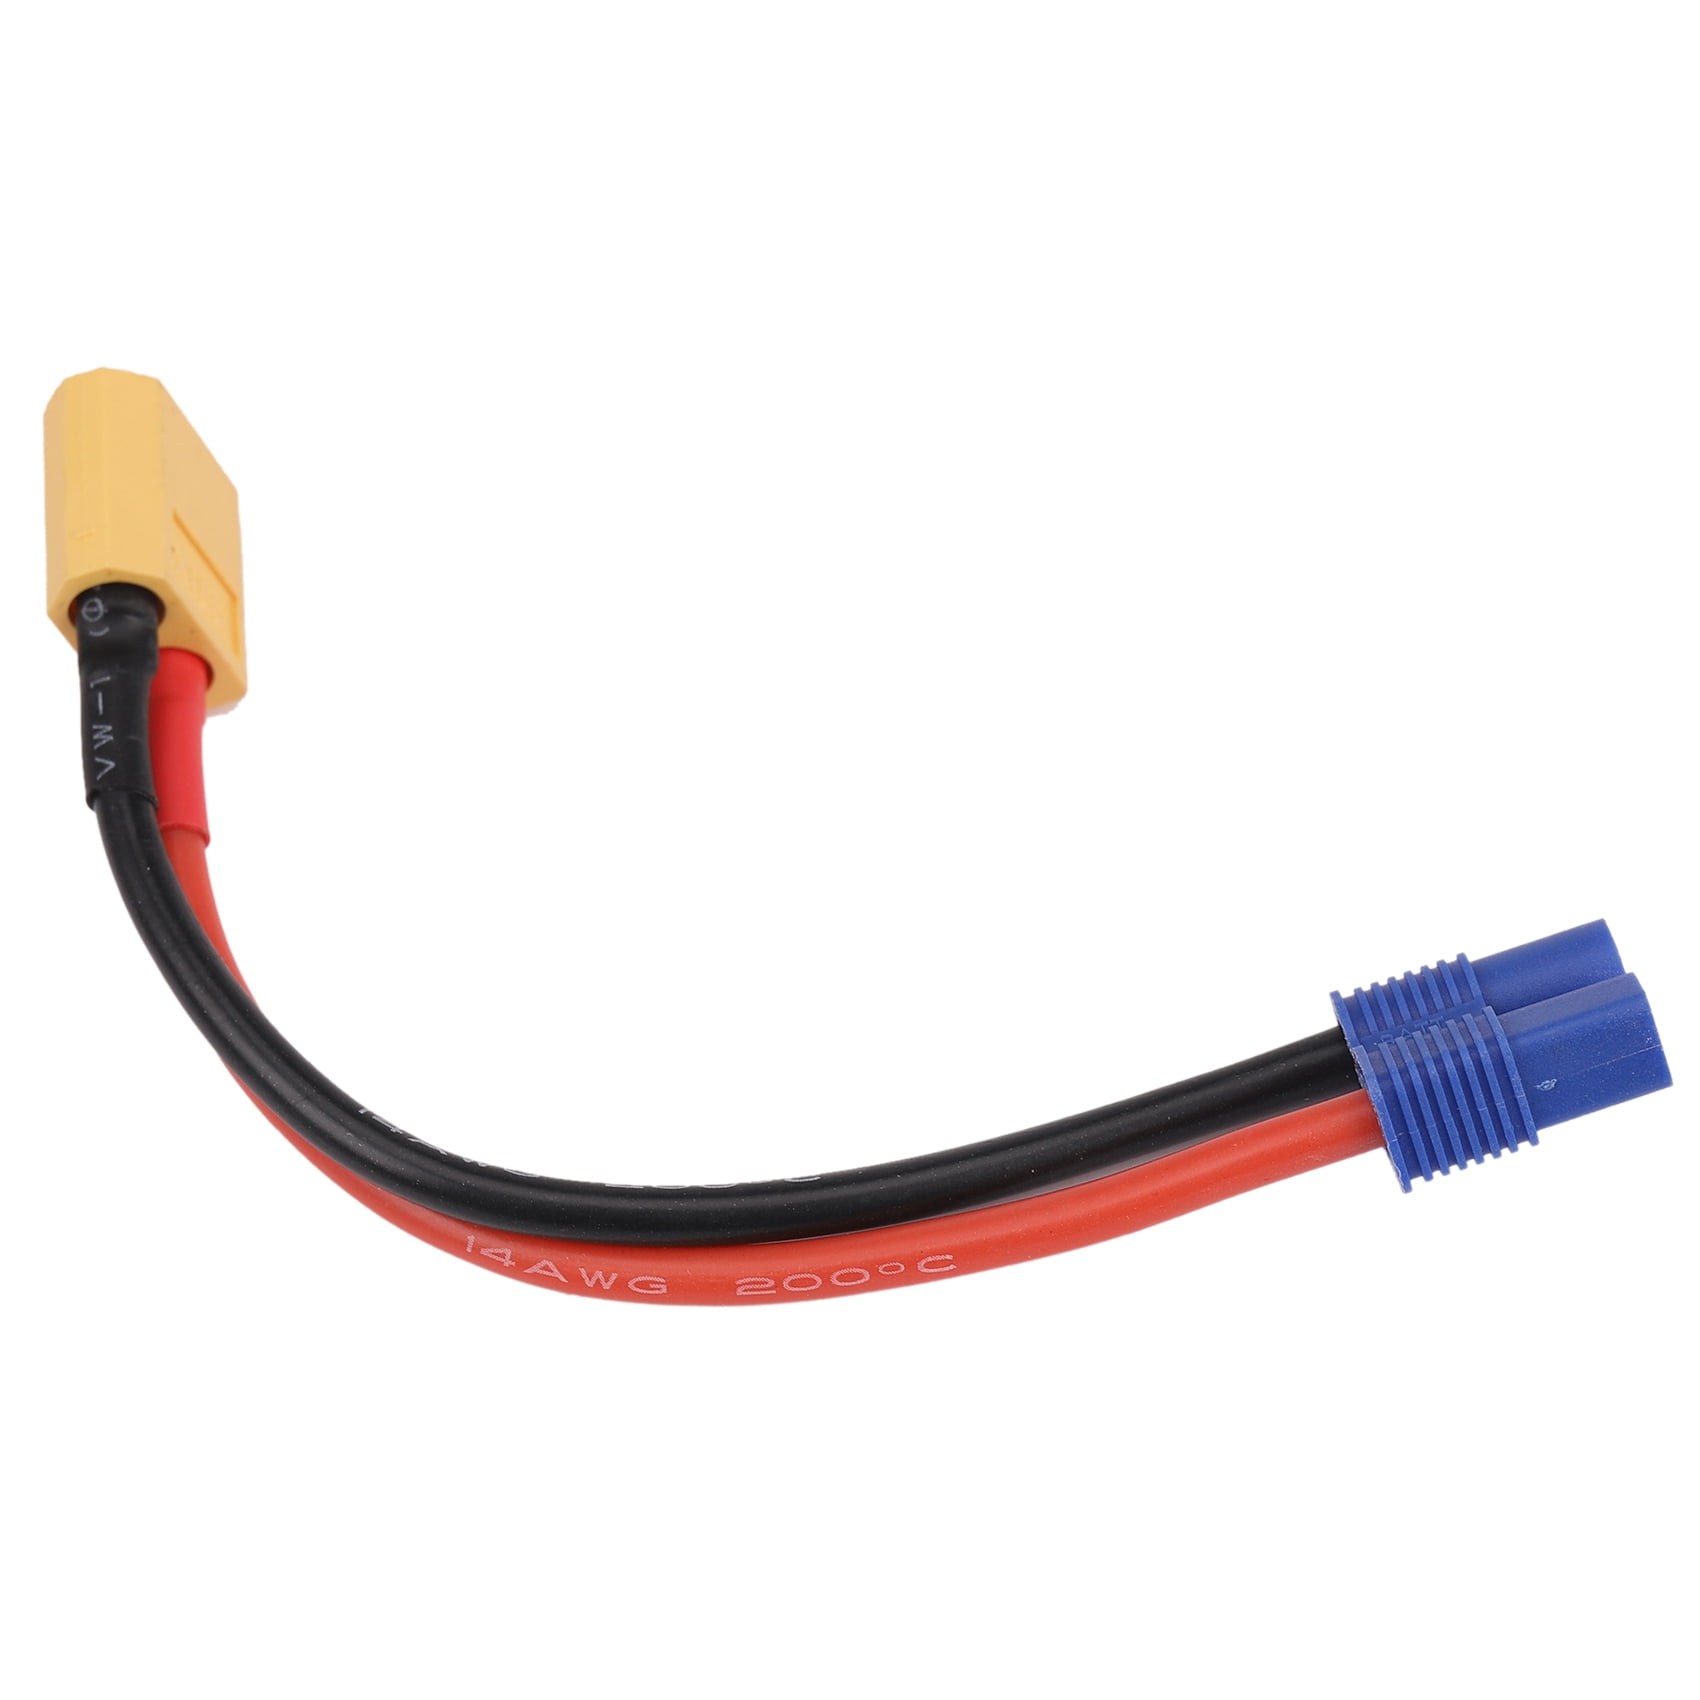 EC3 Serial Series Battery Connector Adapter Power Cable for RC Power US Dealer 